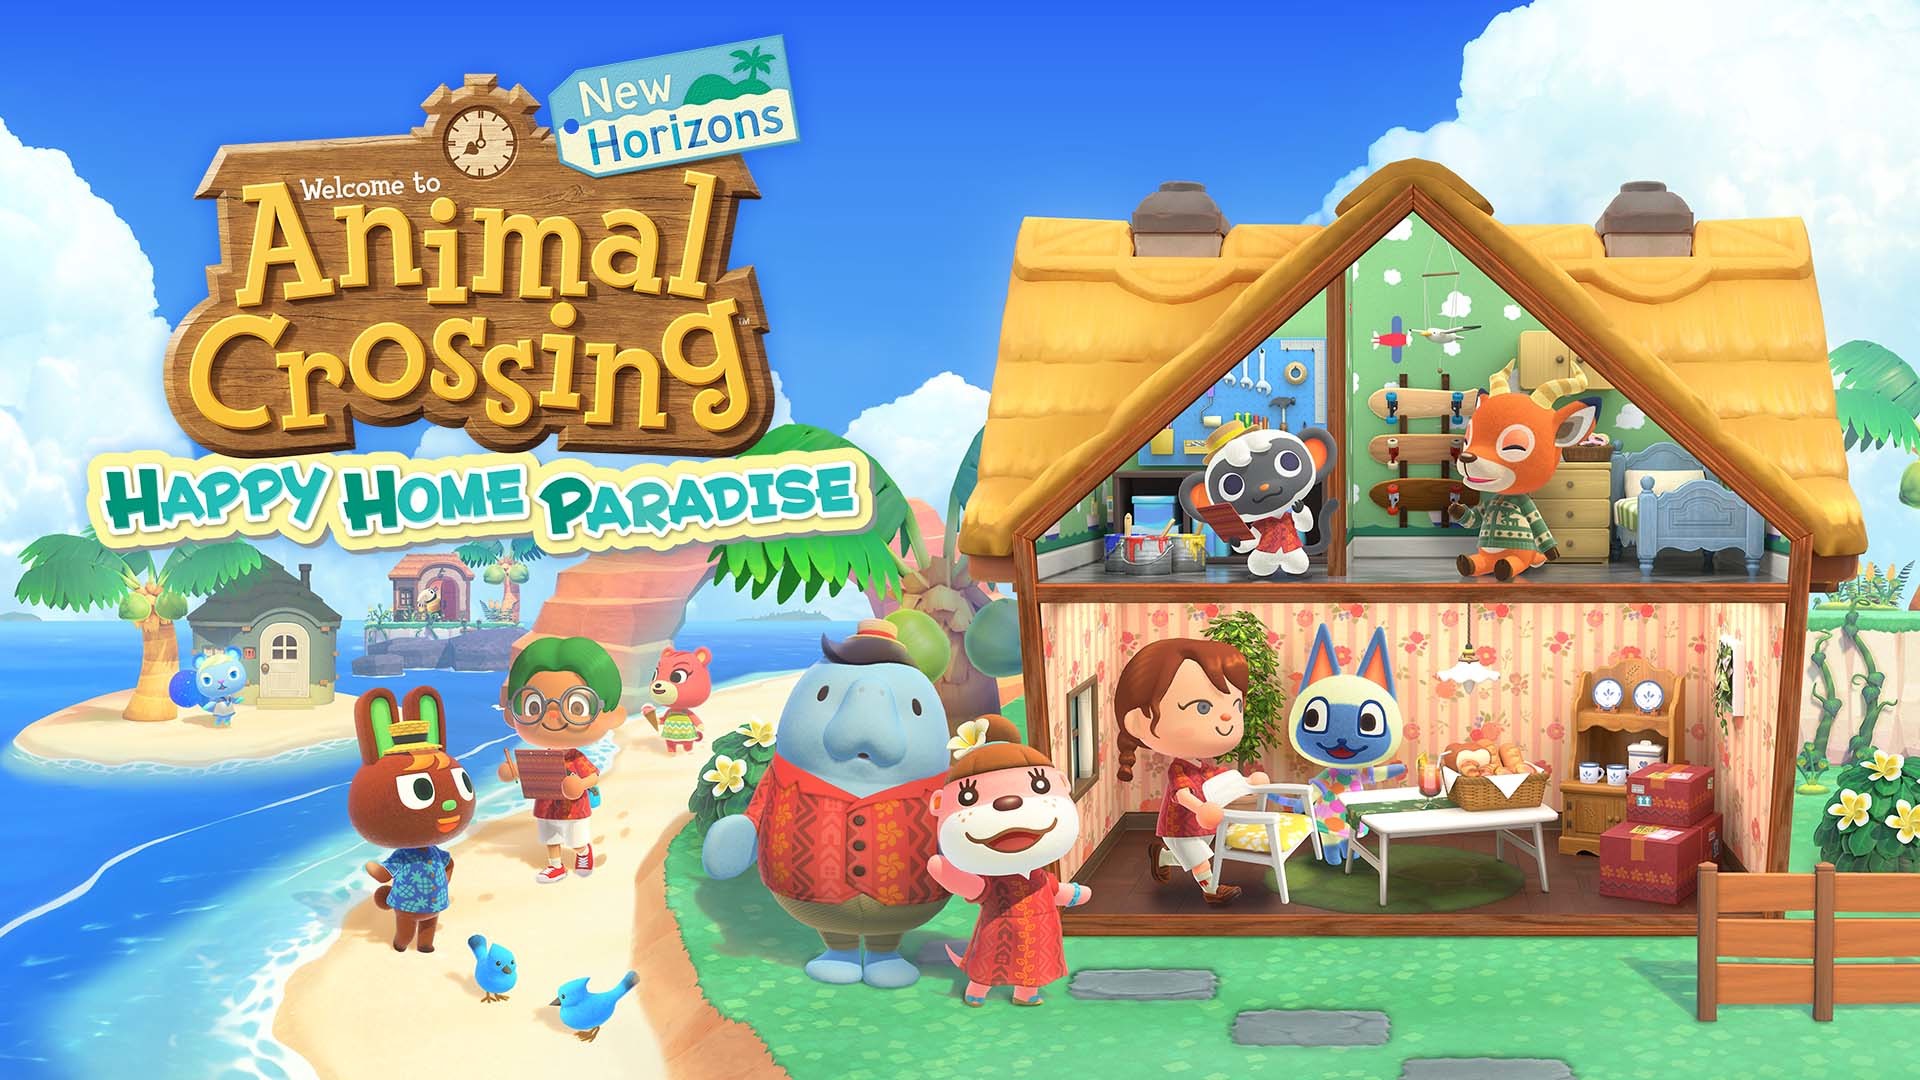 New Horizons has thought about the designers who use Happy Home Paradise DLC

